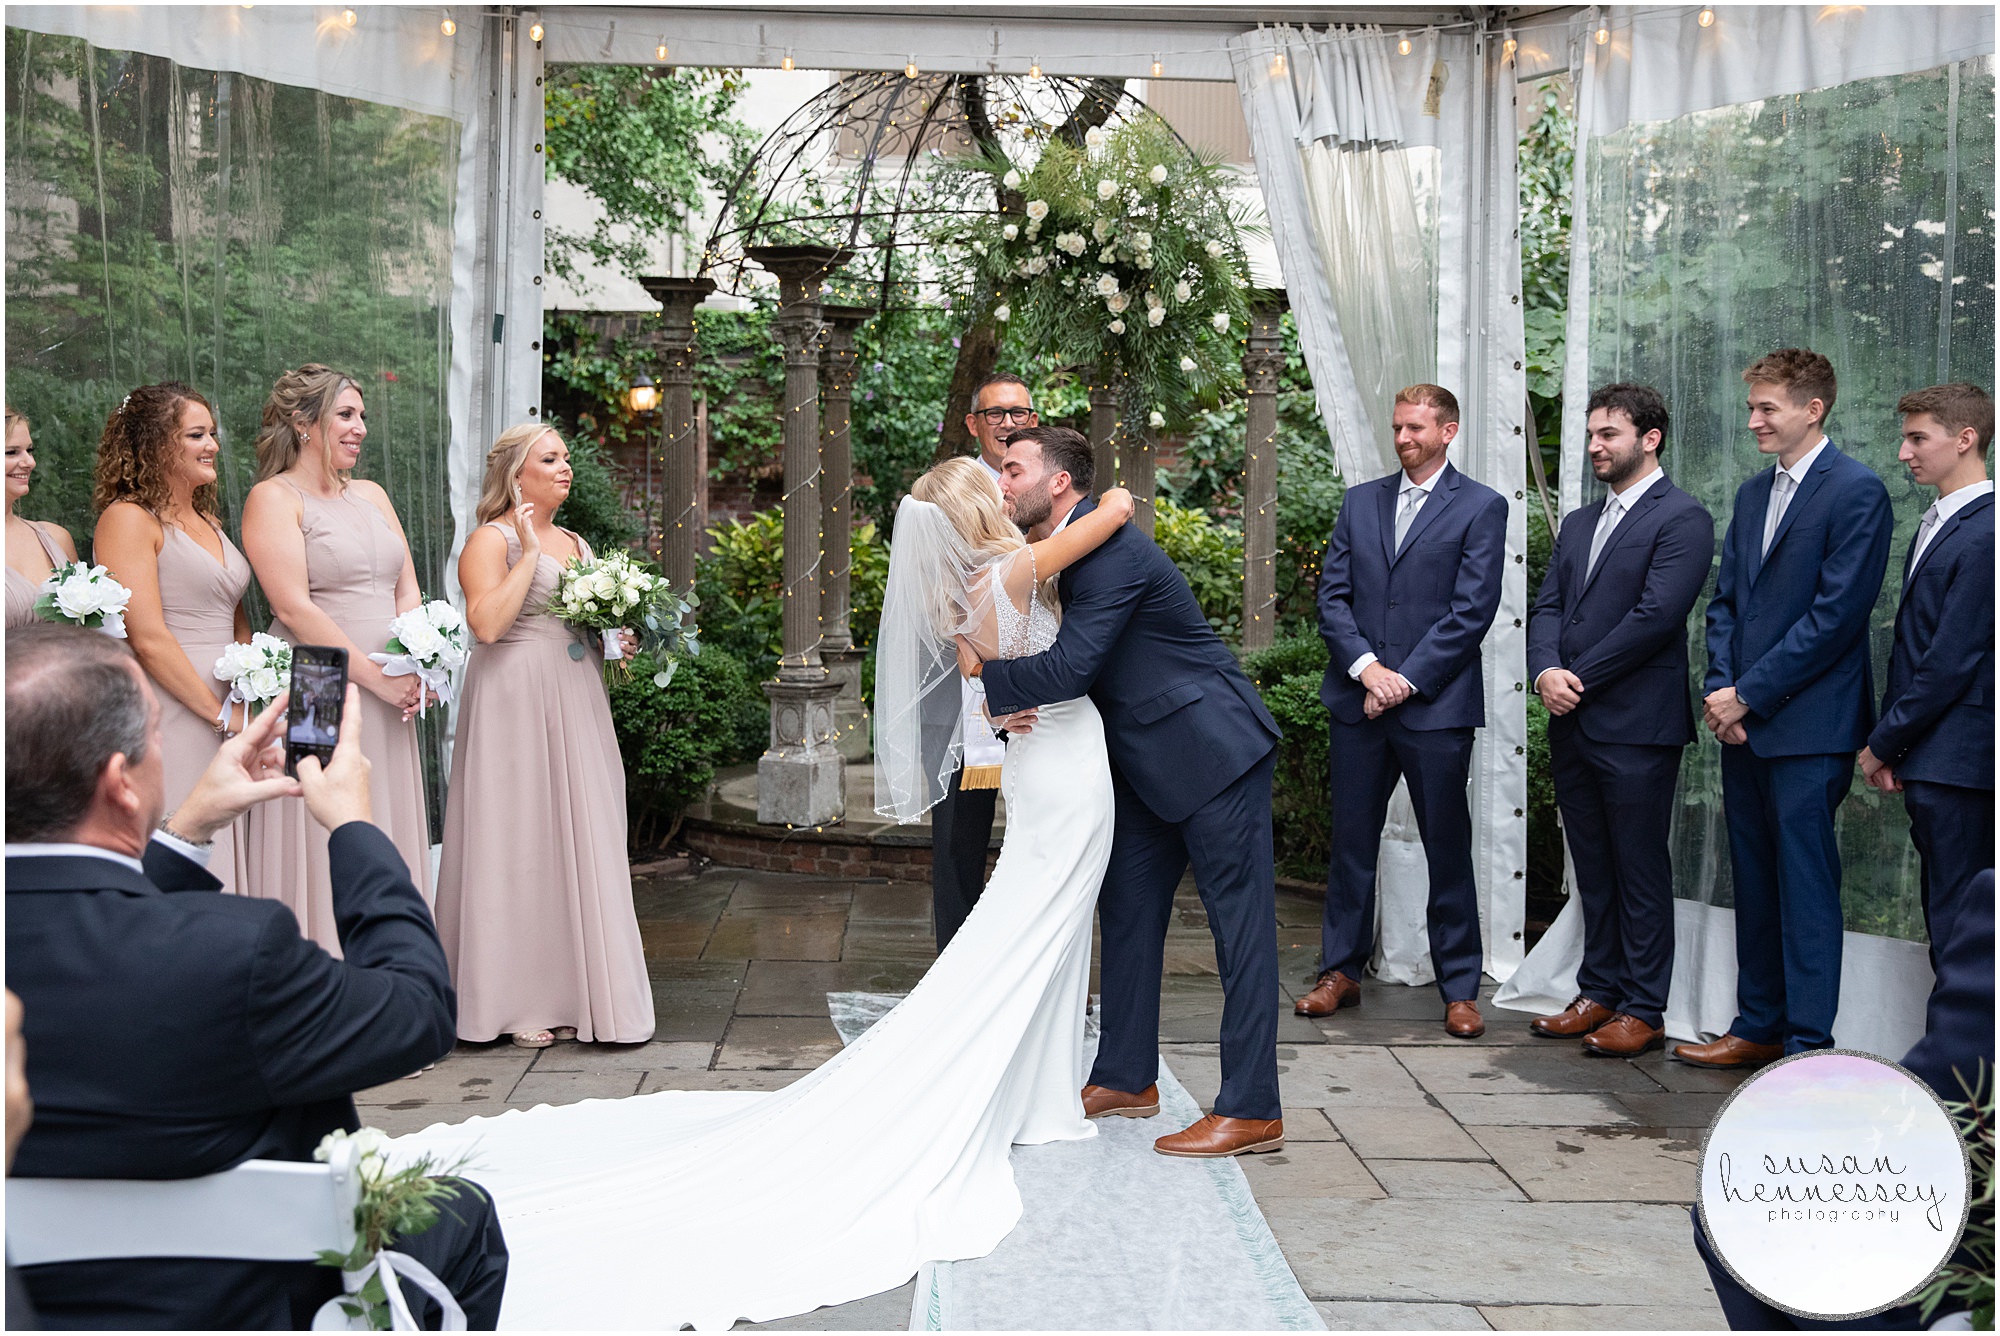 Susan Hennessey Photography Best of 2020 Weddings - Bride and groom kiss at Philadelphia microwedding at Morris House Hotel